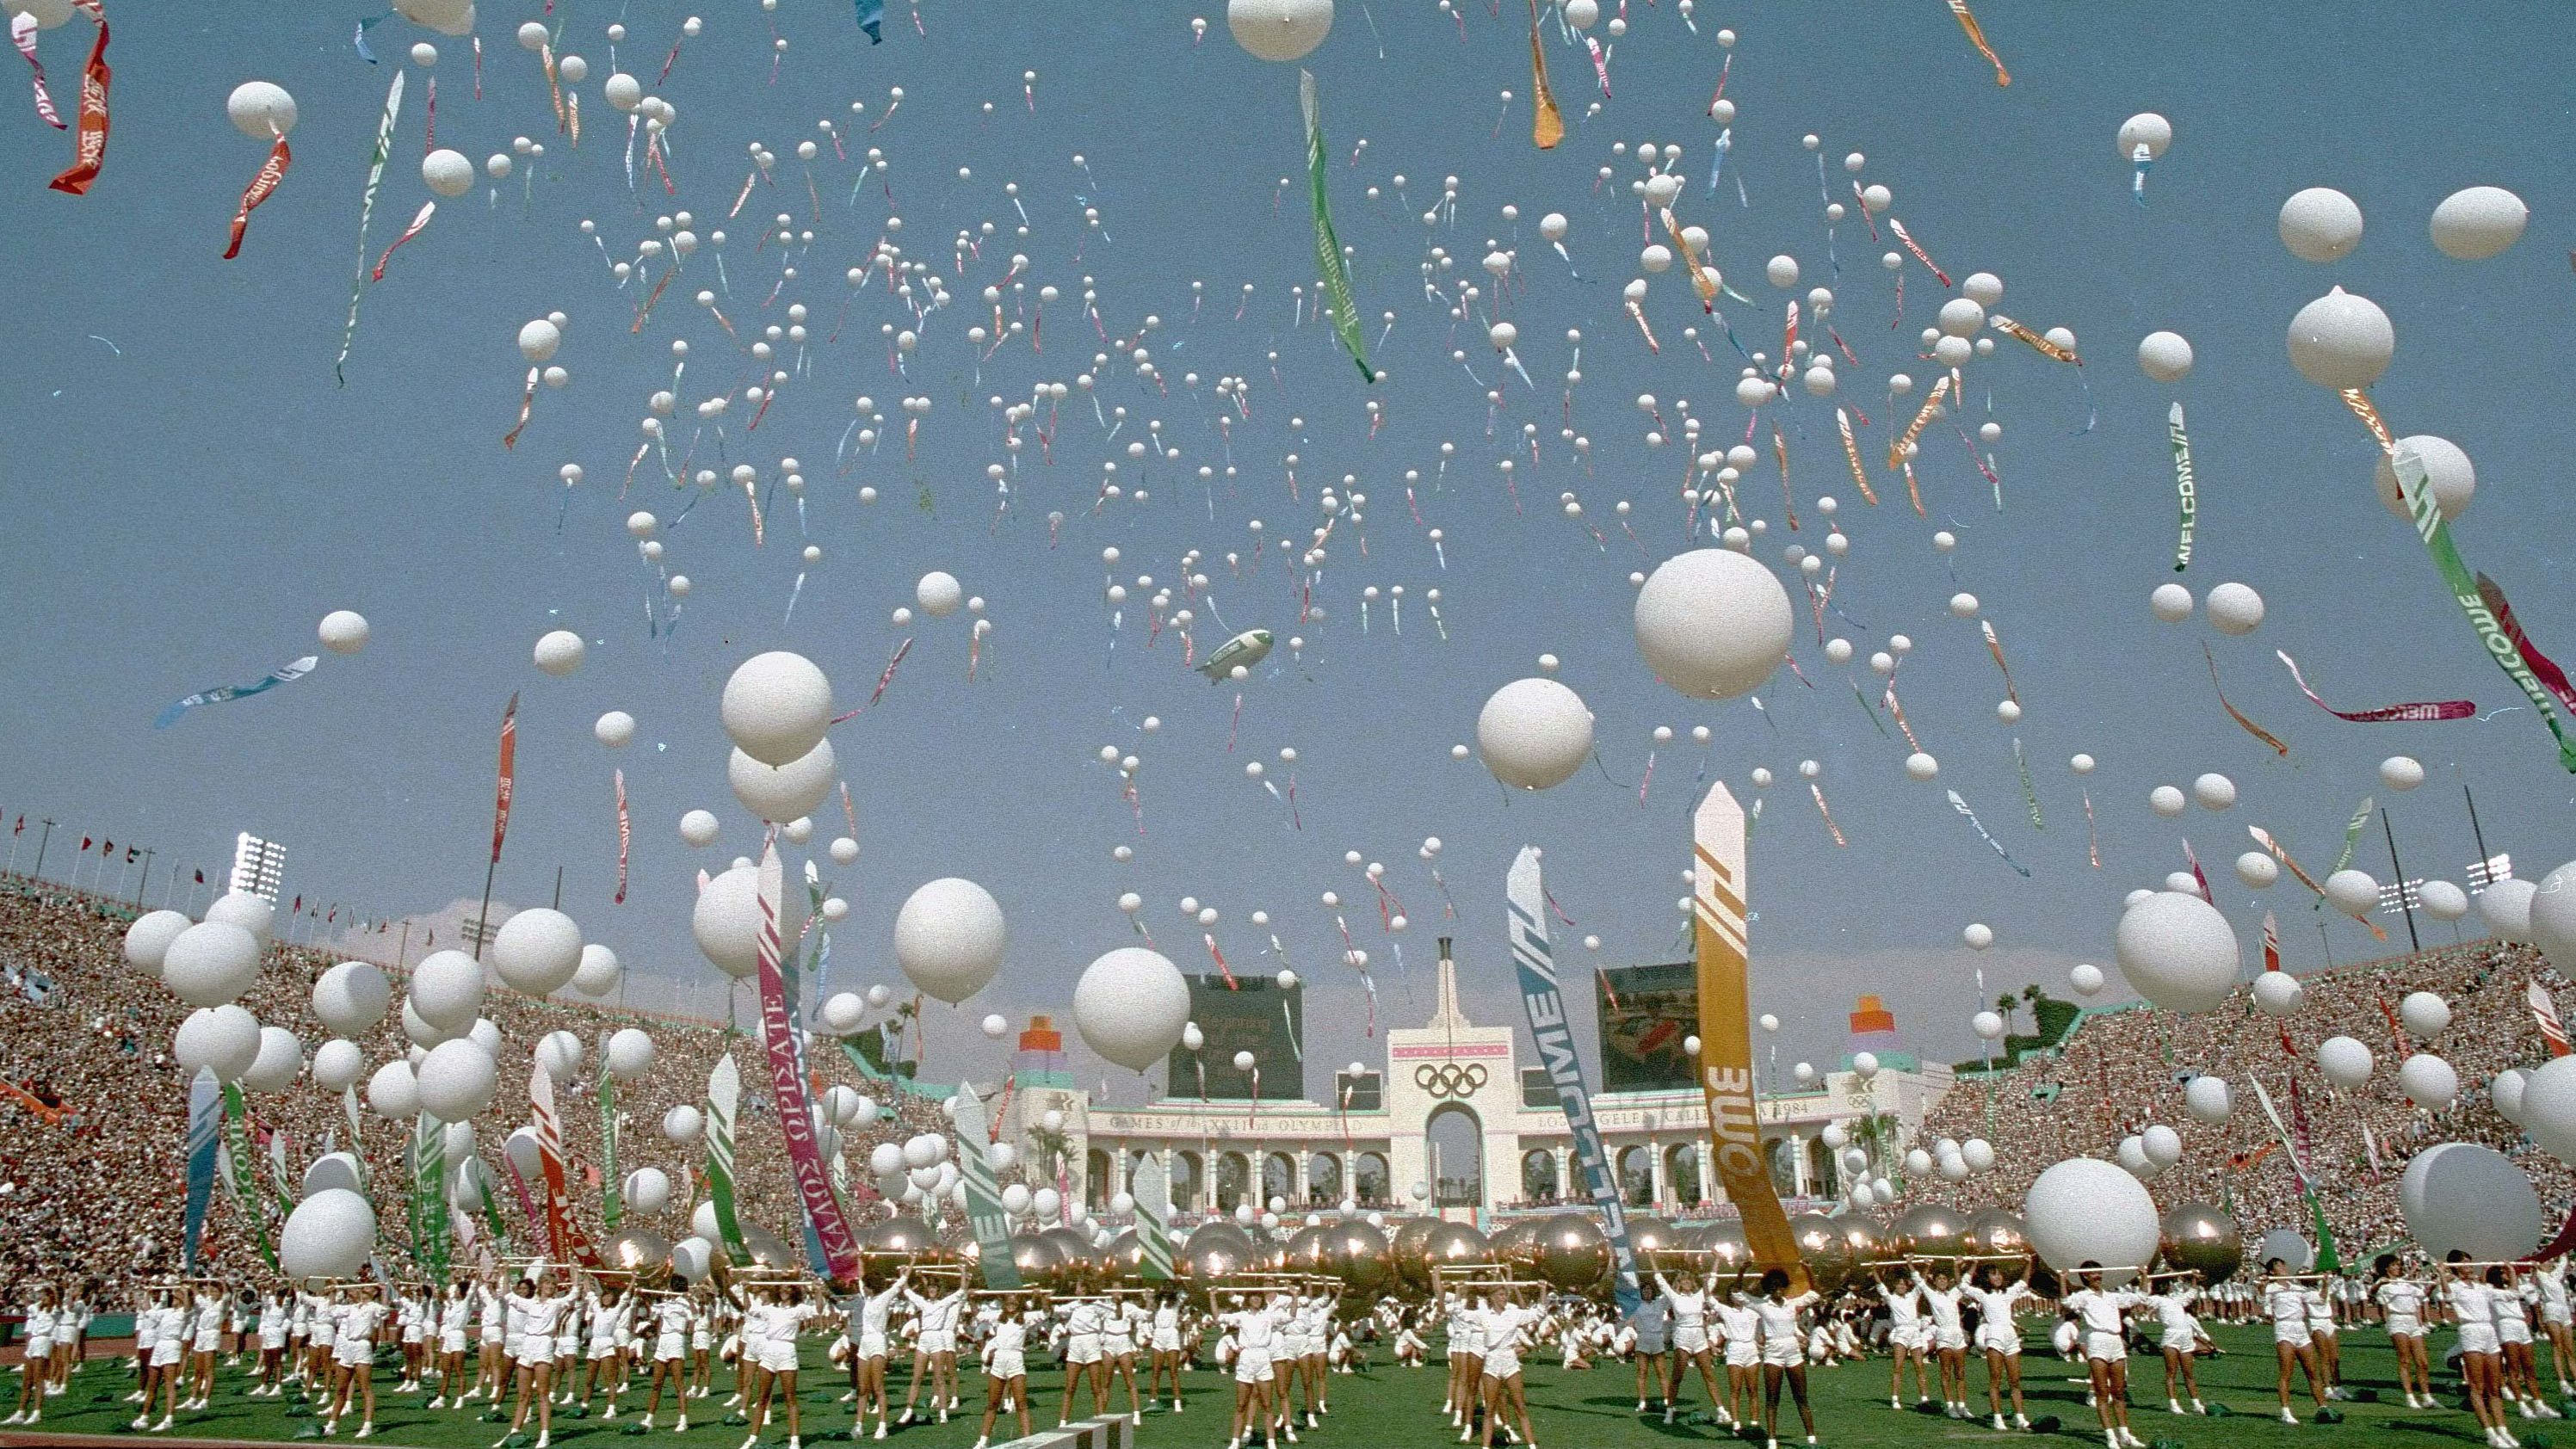 Balloons are released during the opening ceremony for the 1984 Summer Olympics in Los Angeles. After the US boycotted the Moscow Summer Games in 1980, Eastern Bloc countries — including the Soviet Union and East Germany — boycotted the 1984 Games.